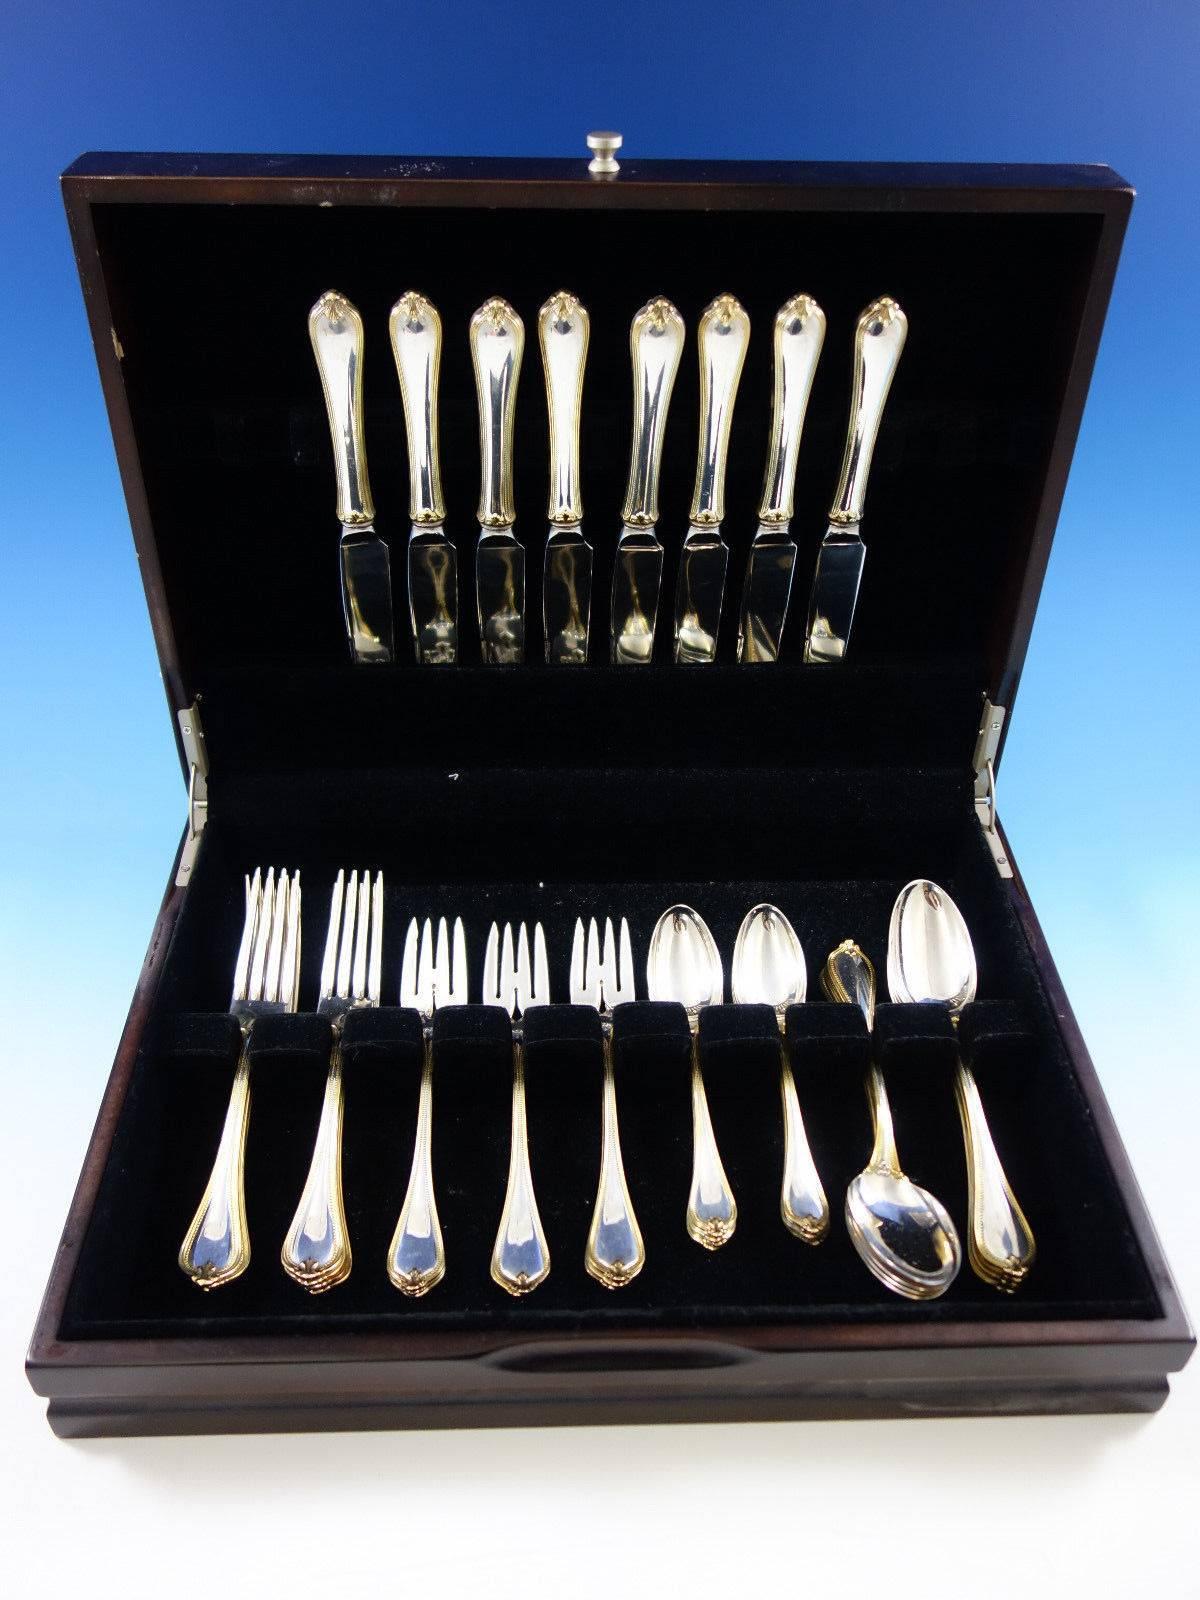 Old Newbury Gold Accent by Towle sterling silver flatware set of 40 pieces. This set includes:
Eight knives, 8 3/4